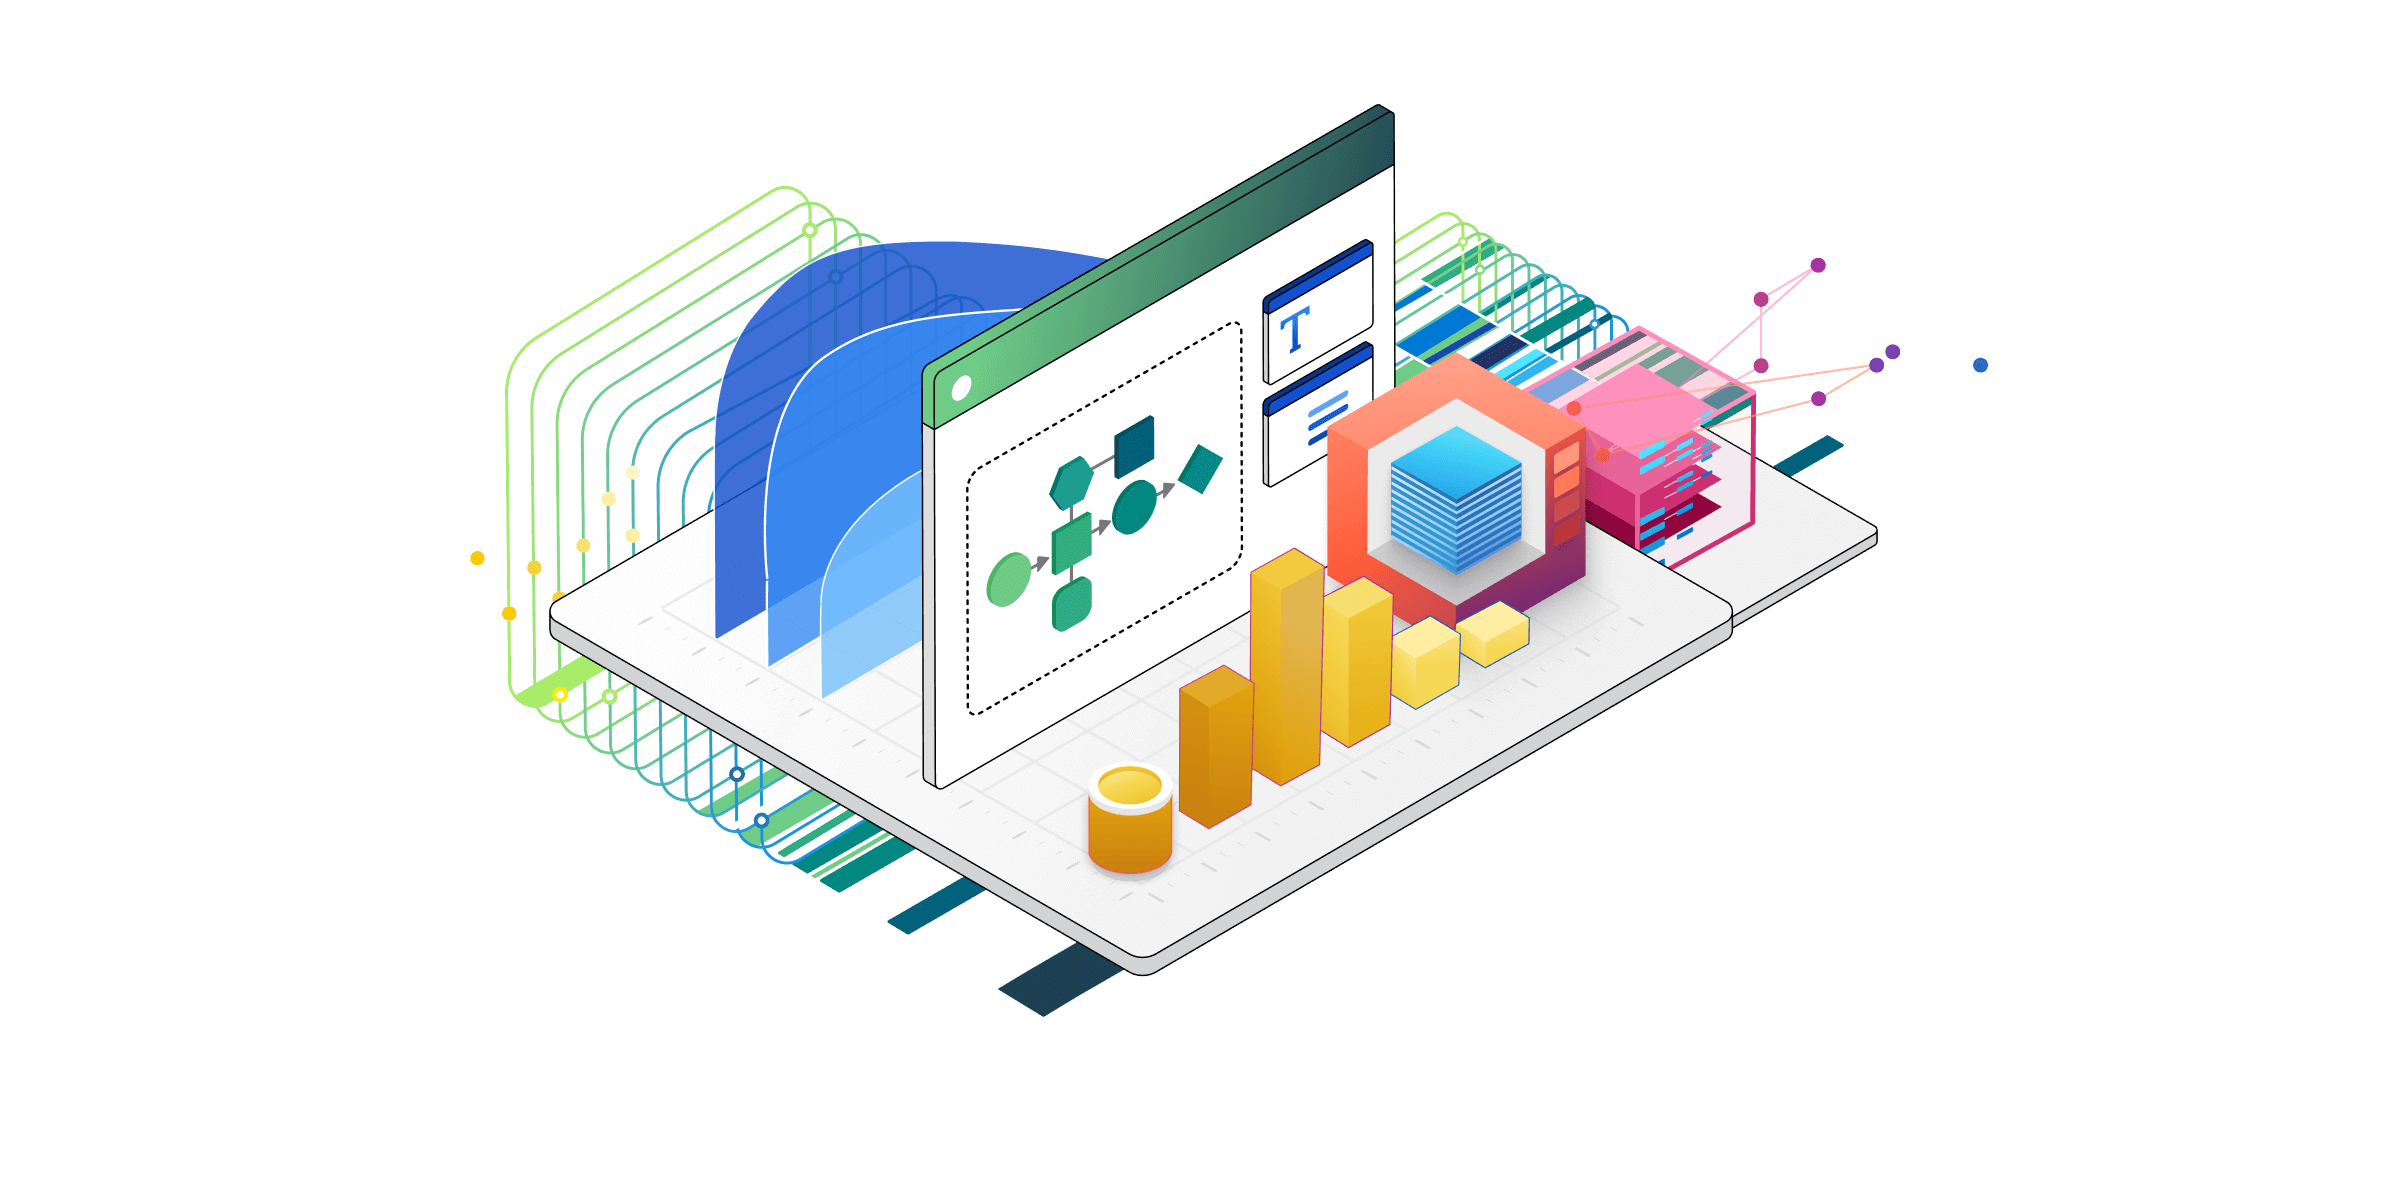 An isometric illustration of technical components for Power Platform services.